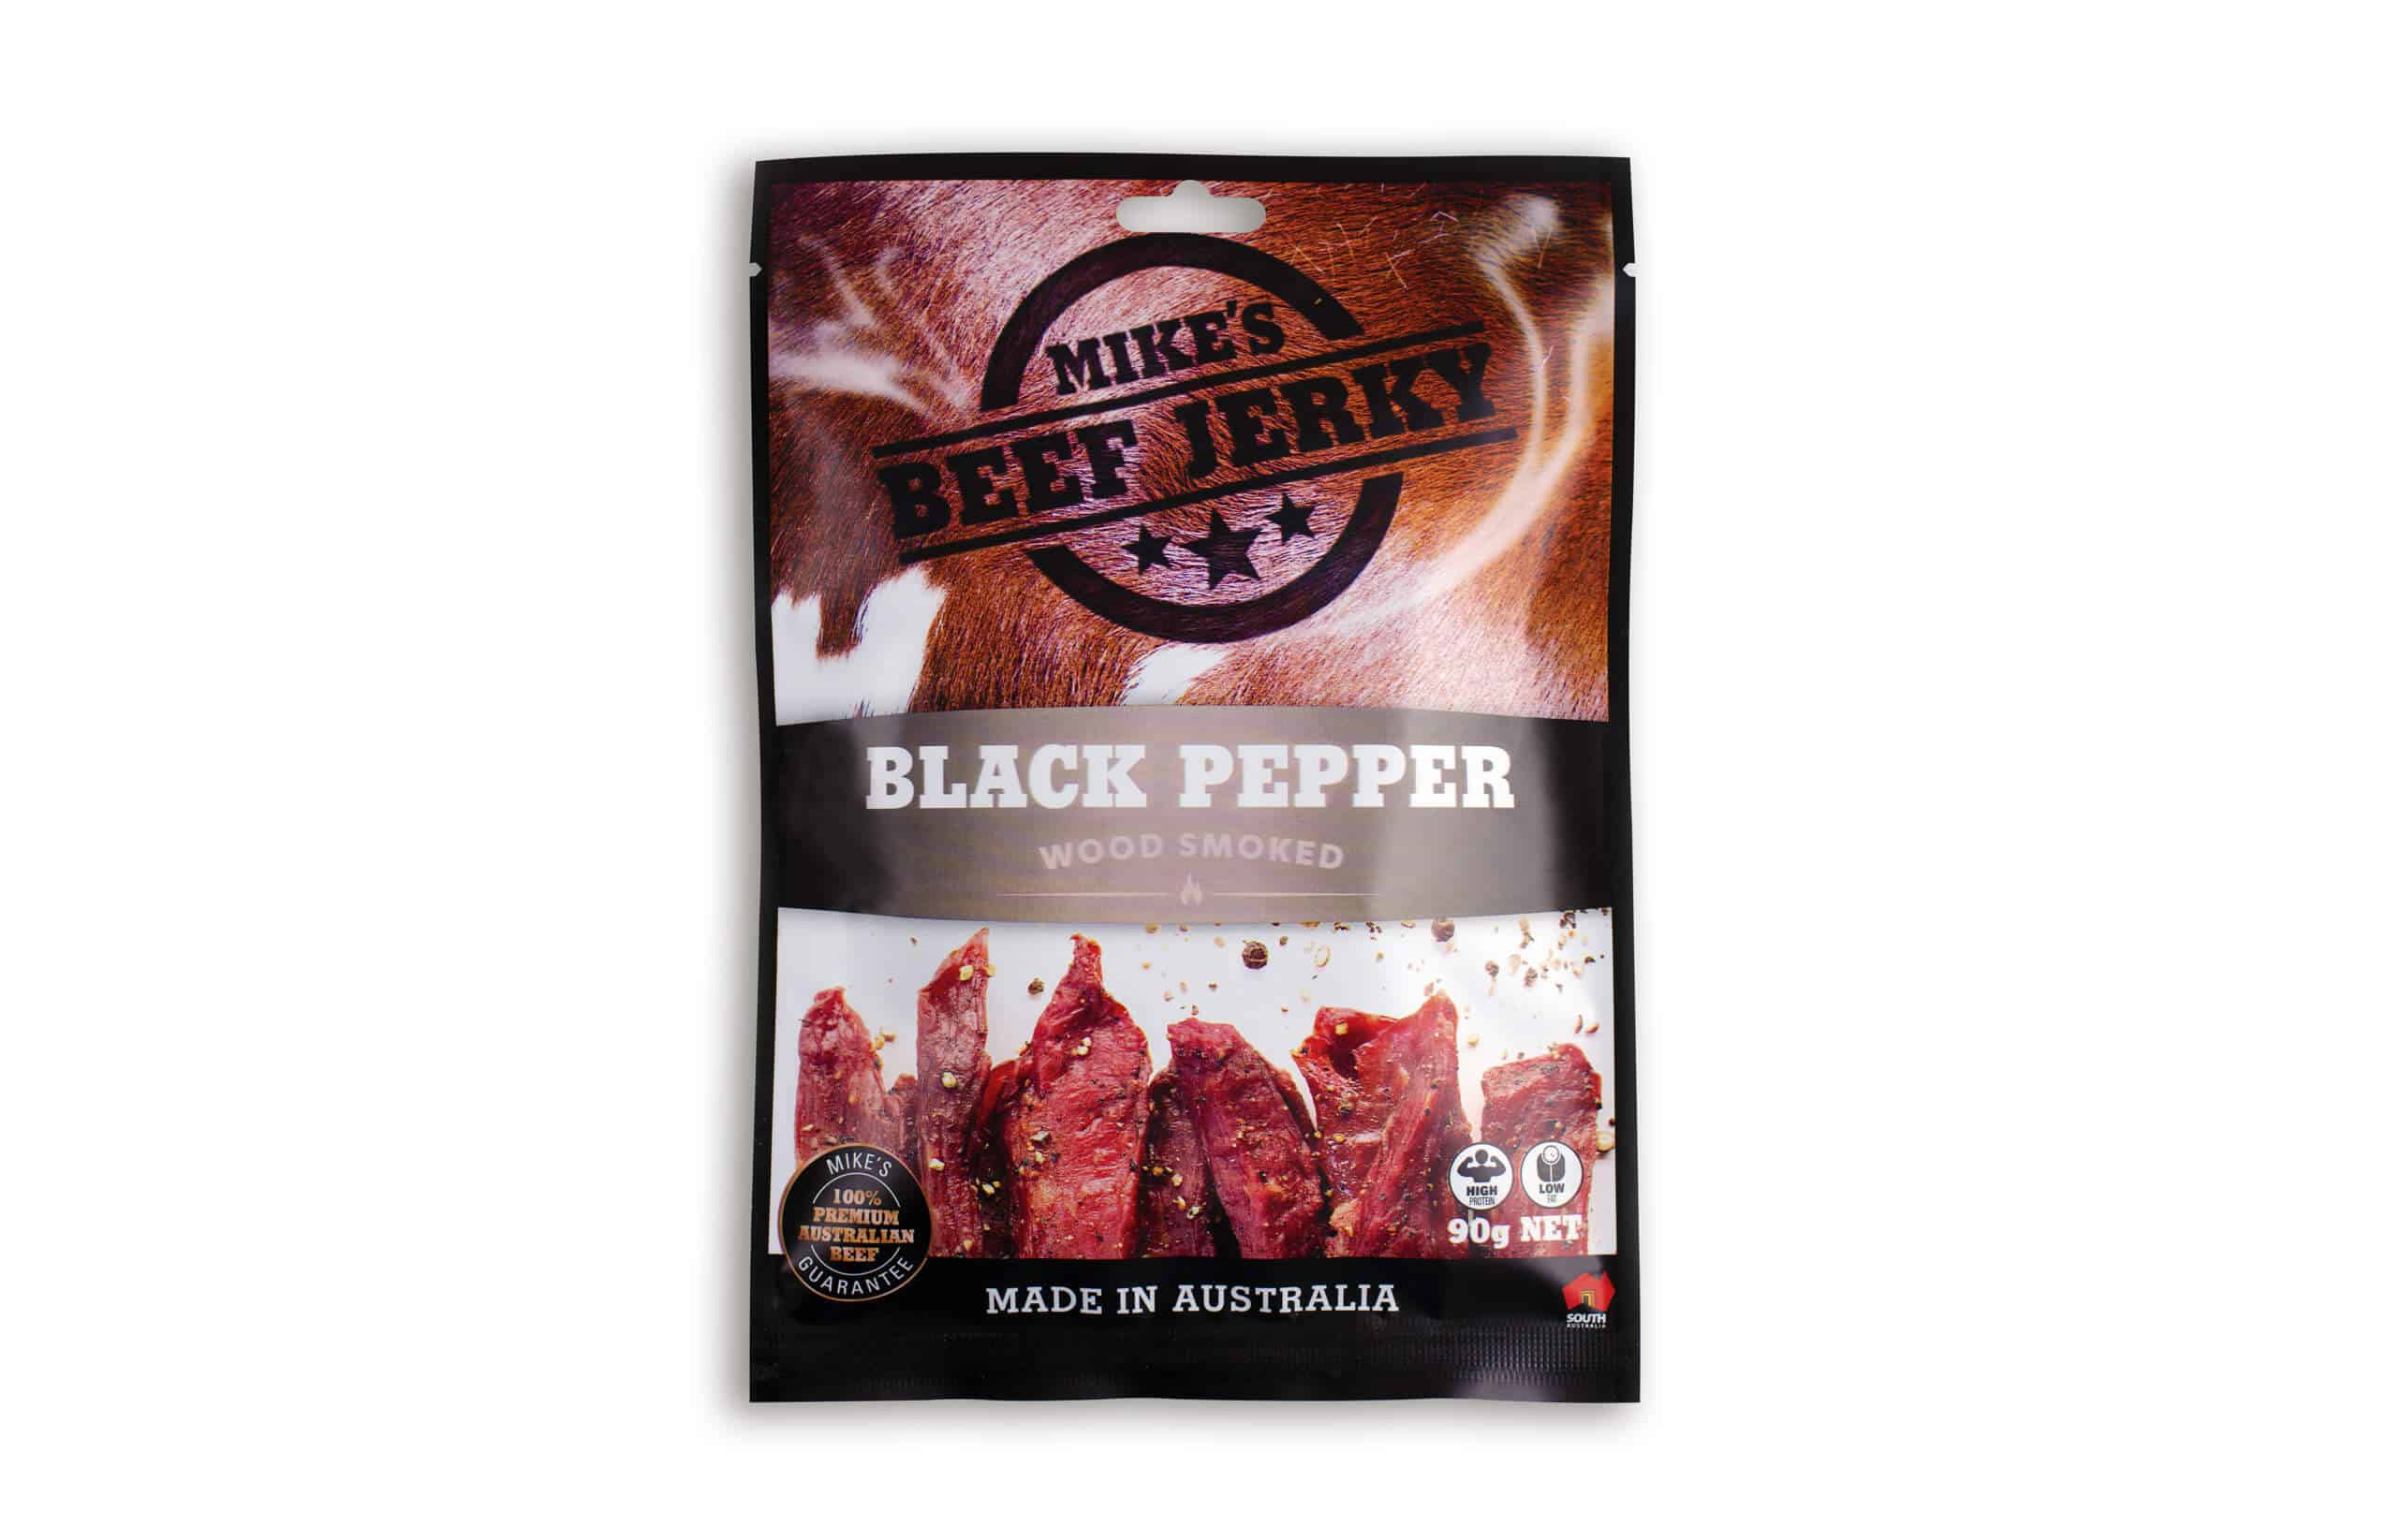 Icon Web Design Adelaide. Image of Mike's Beef jerky Black Pepper pack.